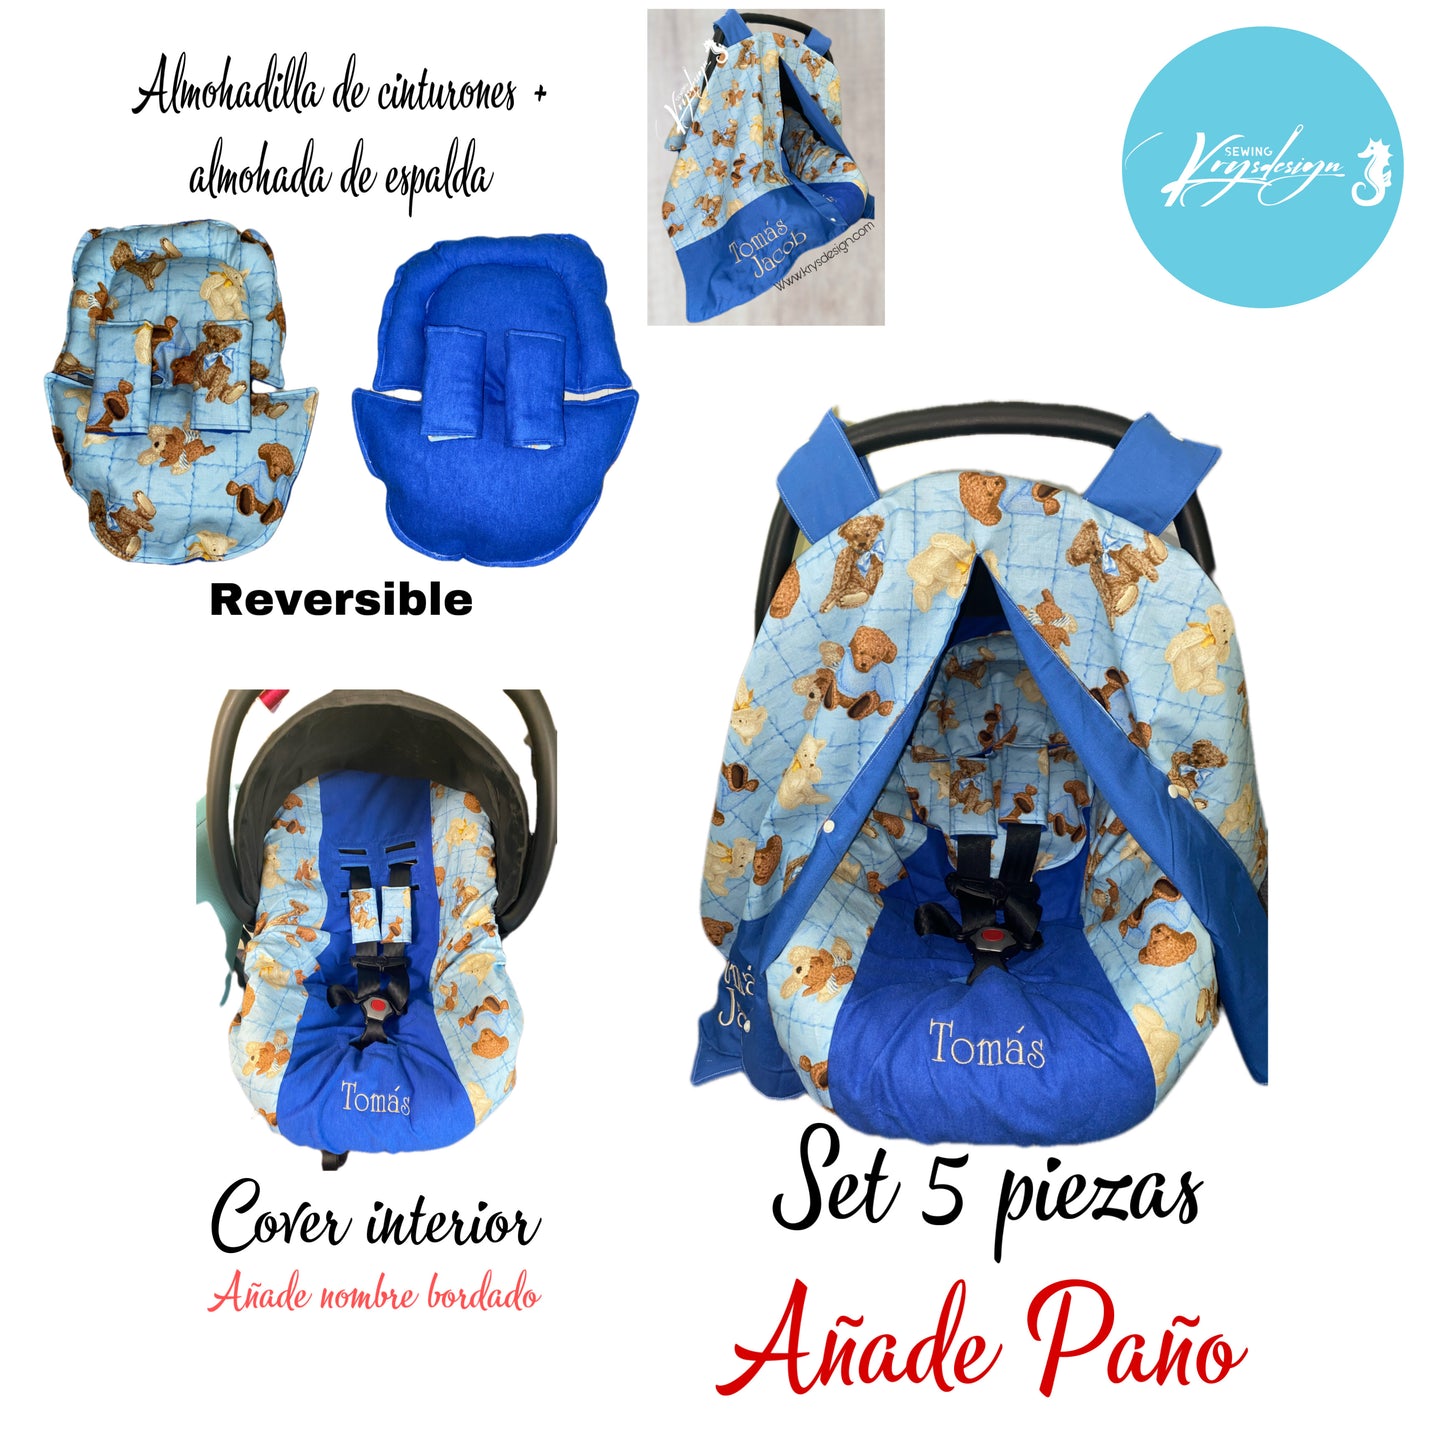 Combos available for car seat